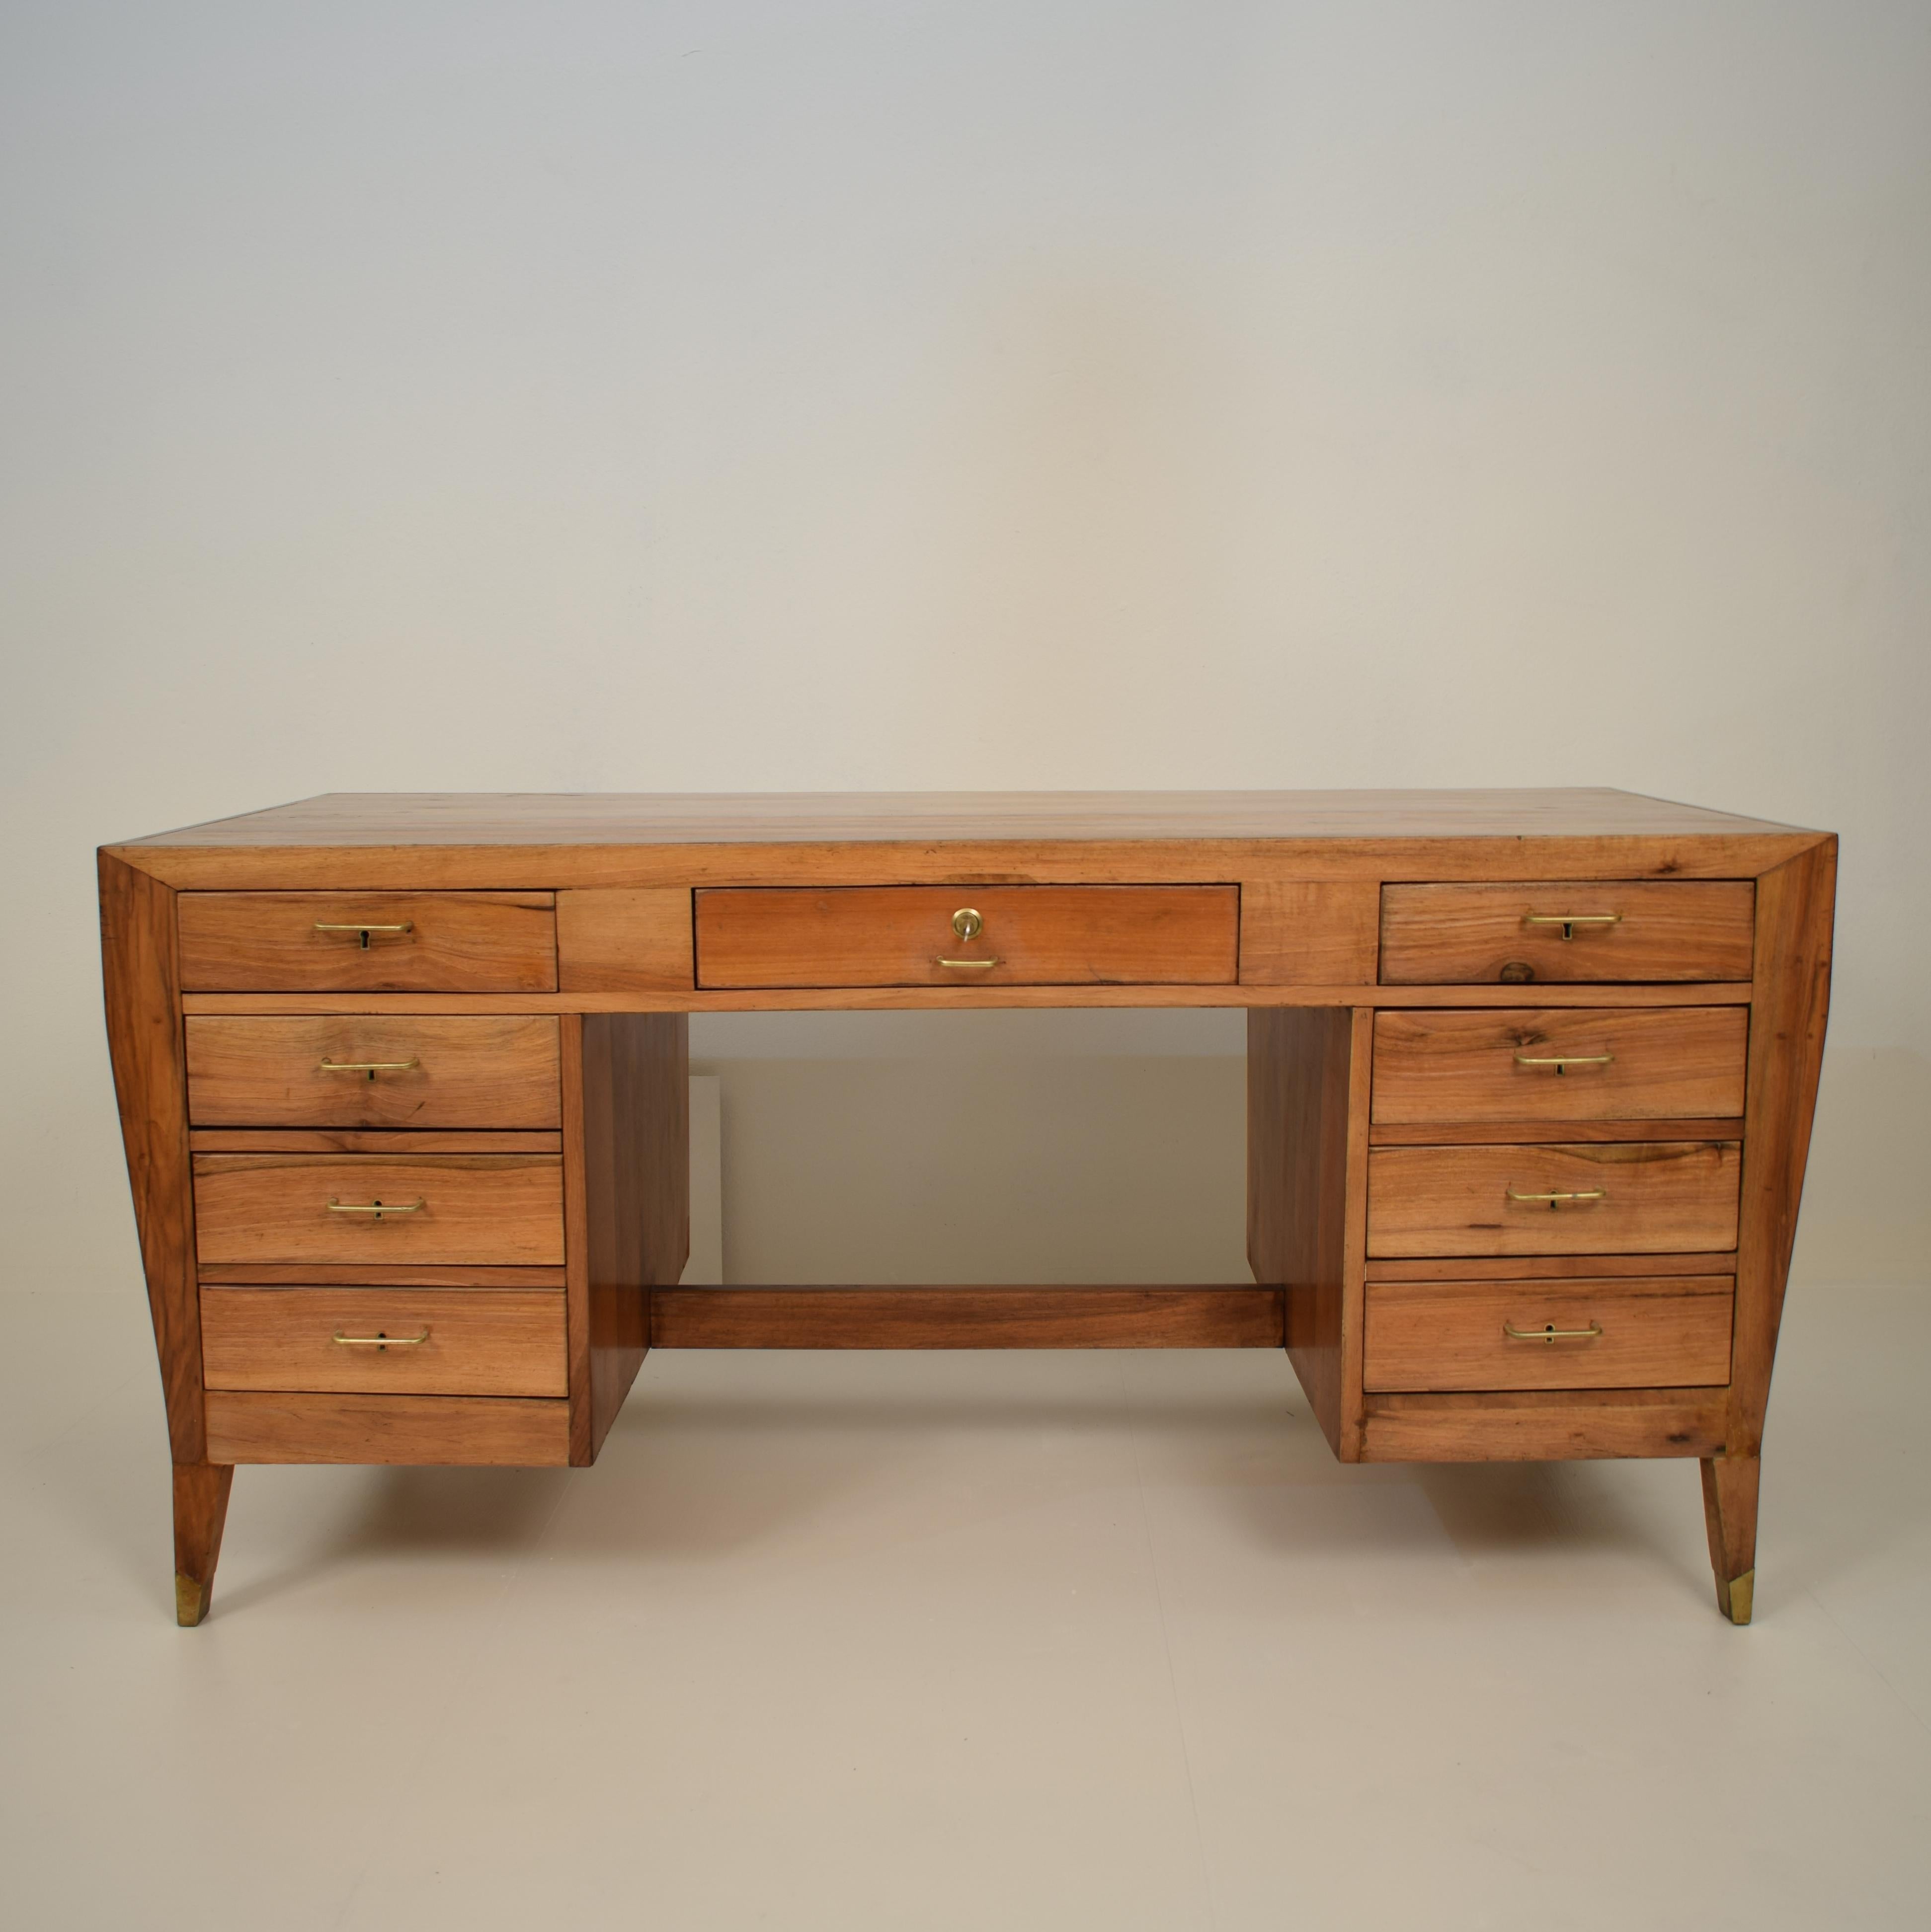 This beautiful midcentury Italian desk was designed by Gio Ponti for Banca Nazionale del Lavoro. It is made in brown walnut and brass, circa 1950.
Produced by Giordano Chiesa.
Bibliography: Magazine Edilizia Moderna nr.52-1954, page 91.
It has got